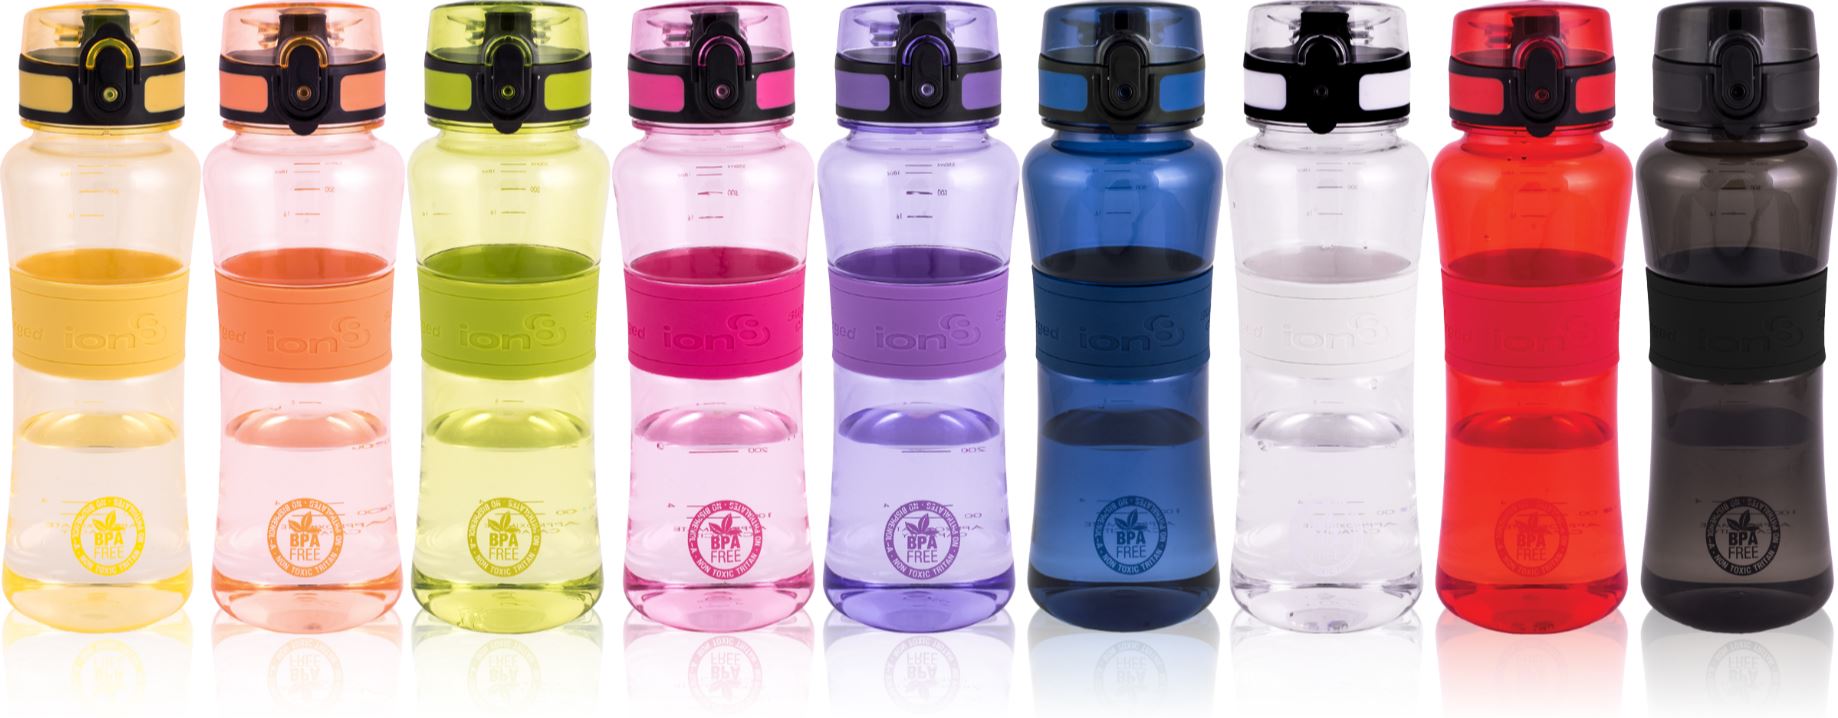 REVIEW: KEEP YOUR COOL WITH ION8 WATER BOTTLE